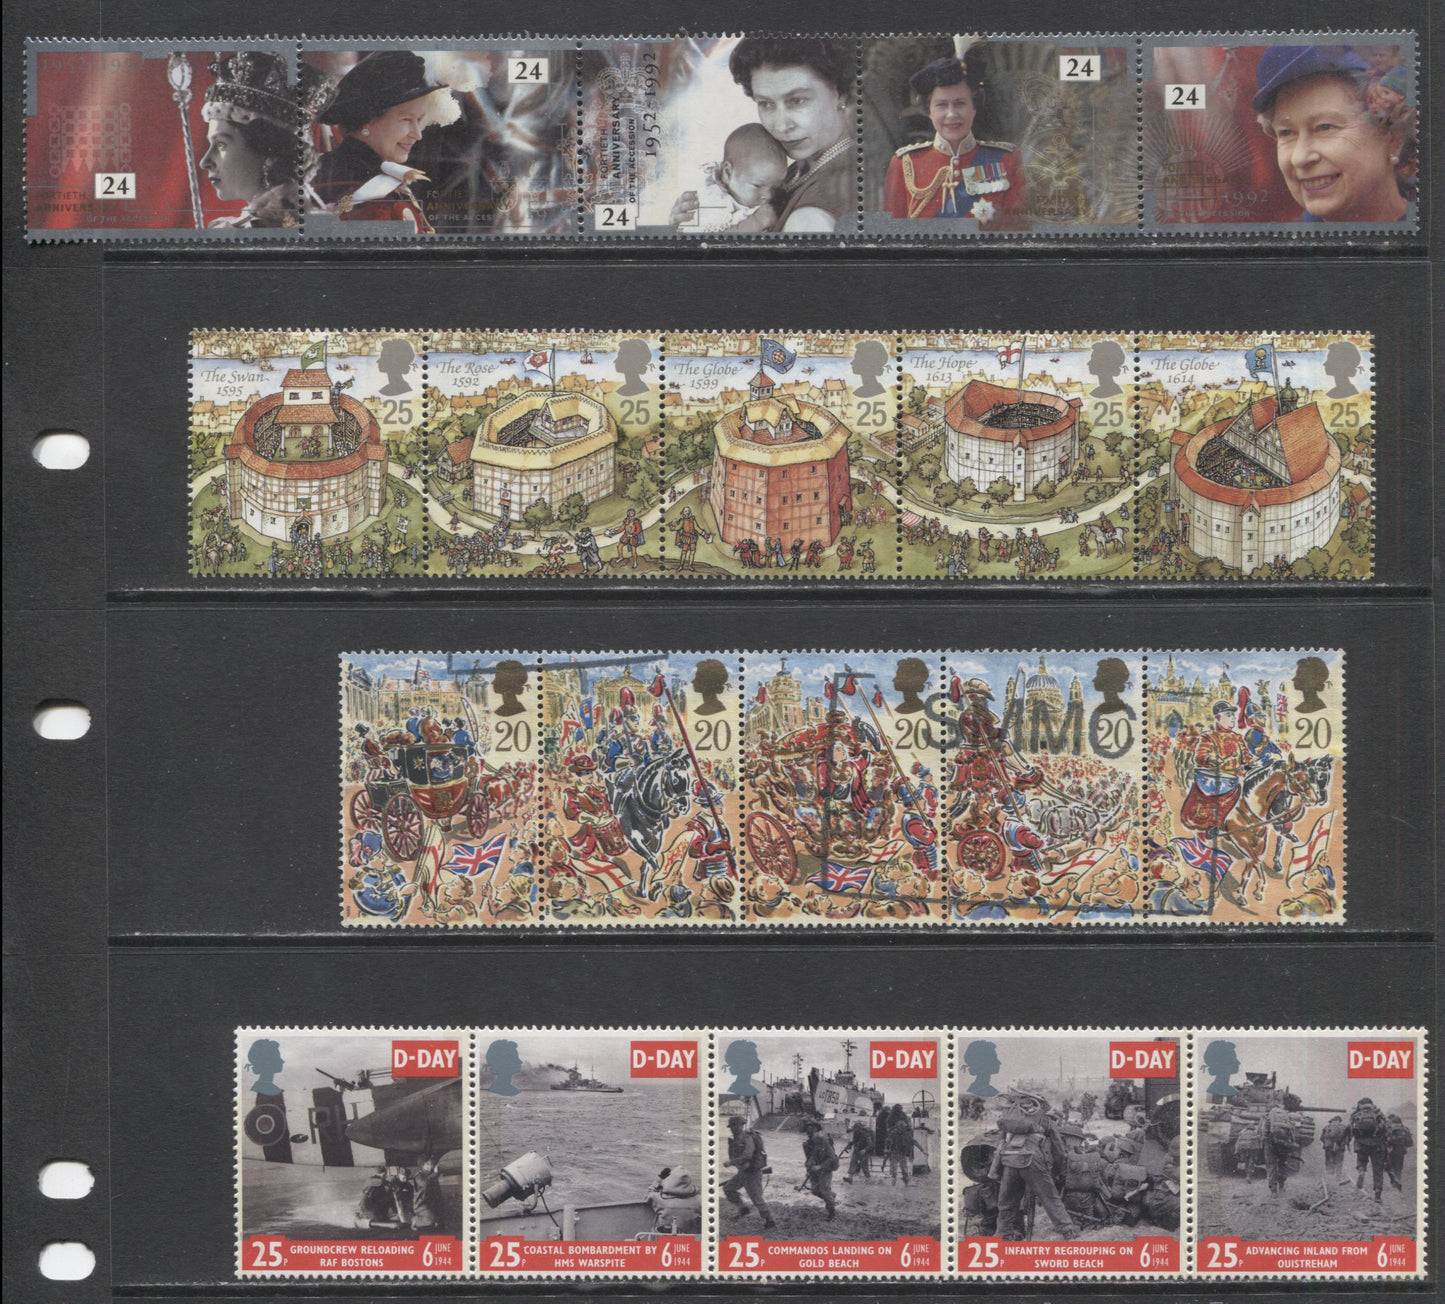 Lot 142 Great Britain SC#1293a/2901 1992-2011 Commemoratives, A VFNH and VF Used Range Of Souvenir Sheets & Strips Of 5, 2017 Scott Cat. $25.75 USD, Click on Listing to See ALL Pictures